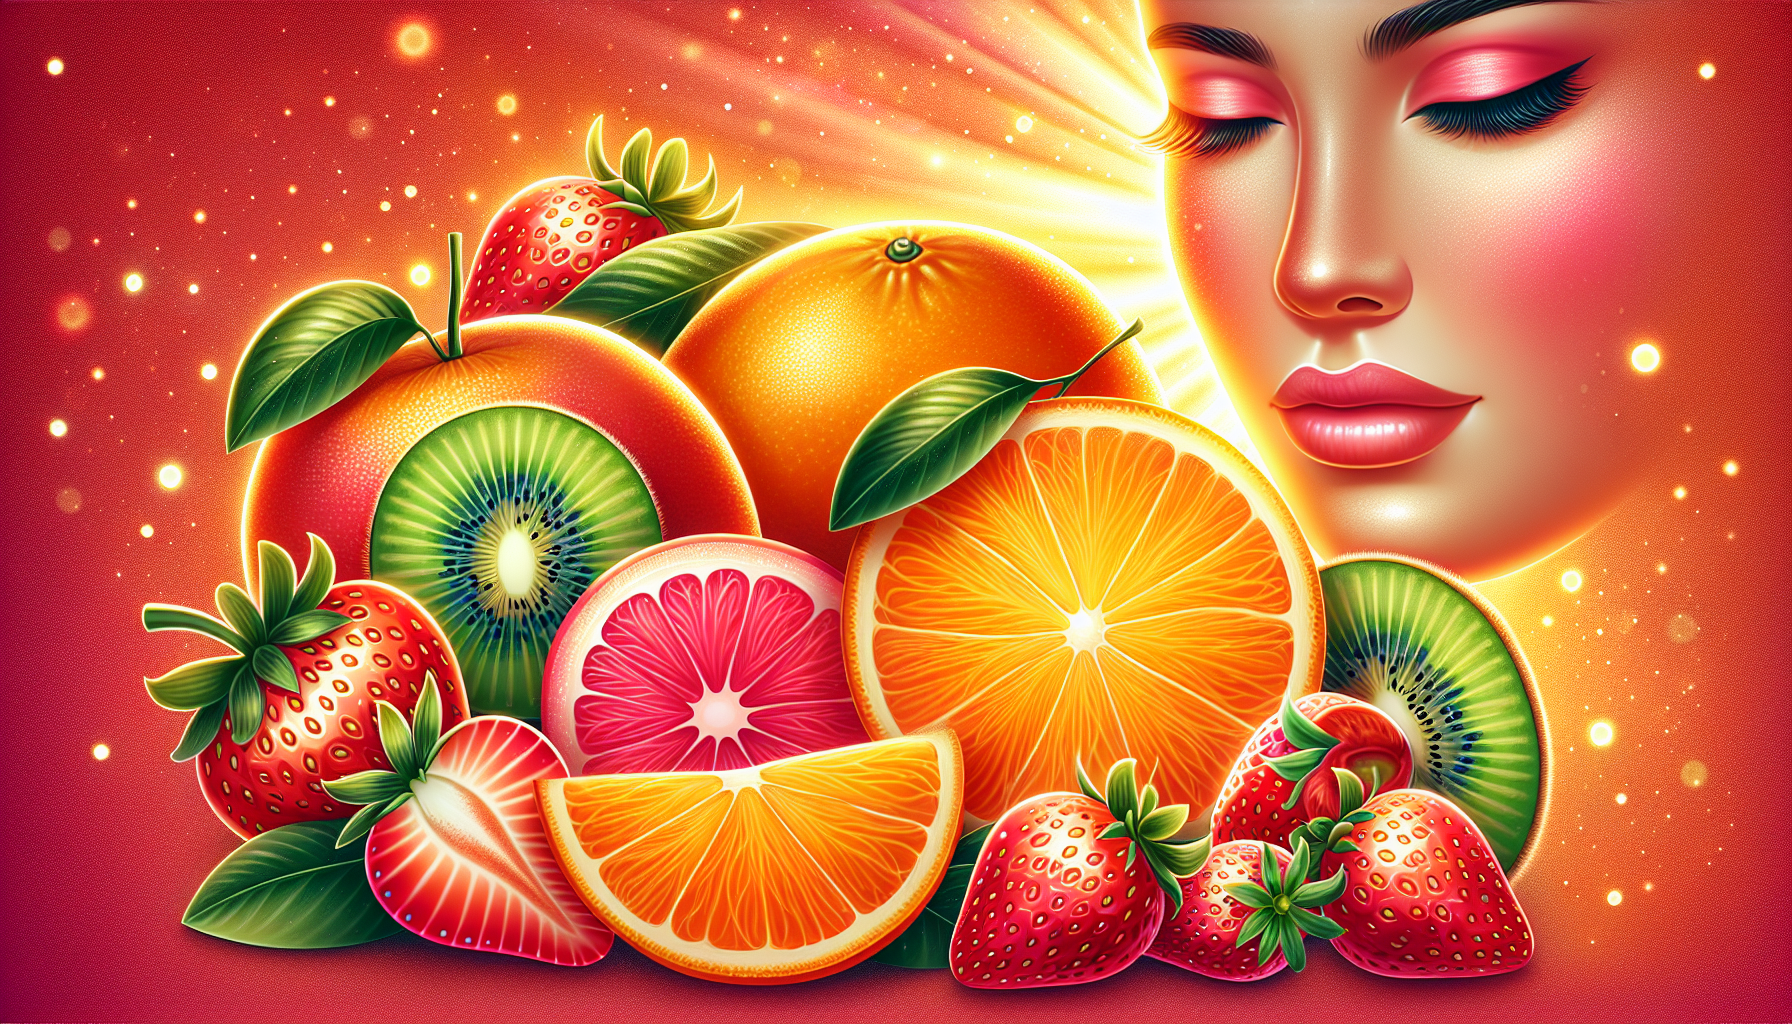 Illustration of vitamin C-rich fruits for collagen production